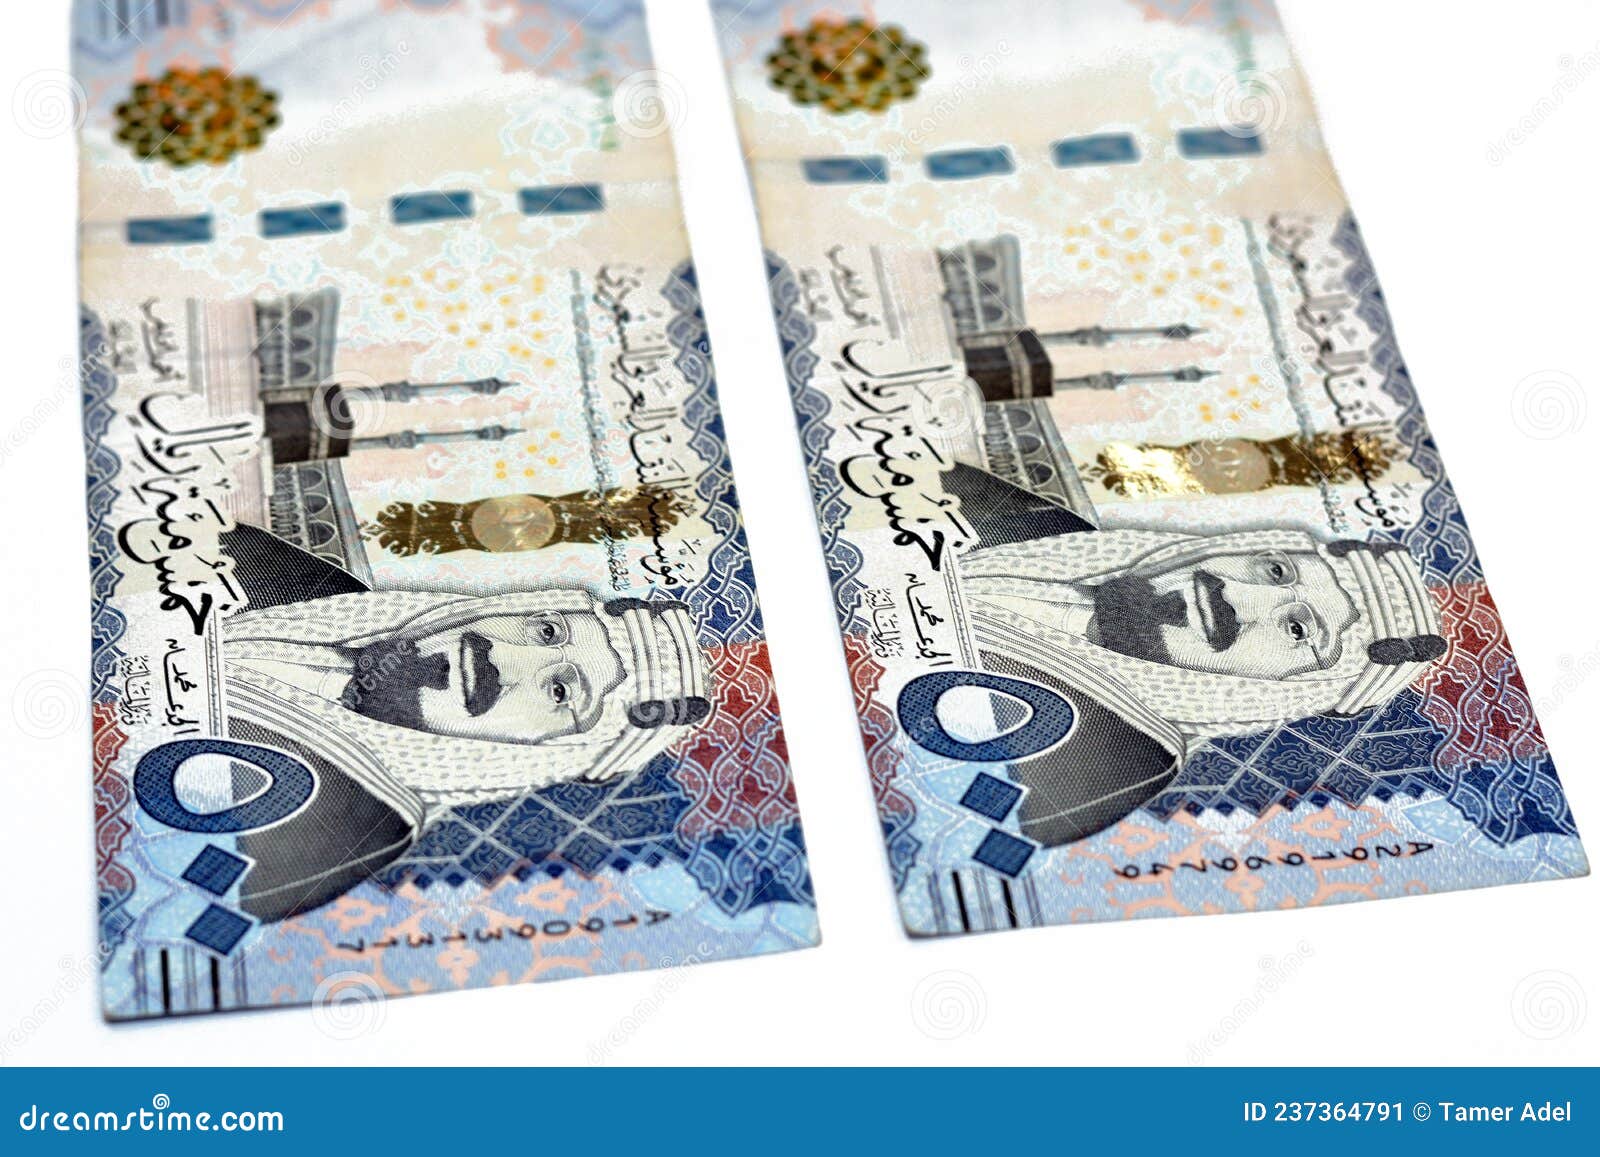 obverse sides of 500 five hundred saudi riyals banknote features kaaba in mecca and portrait of king abdelaziz al saud